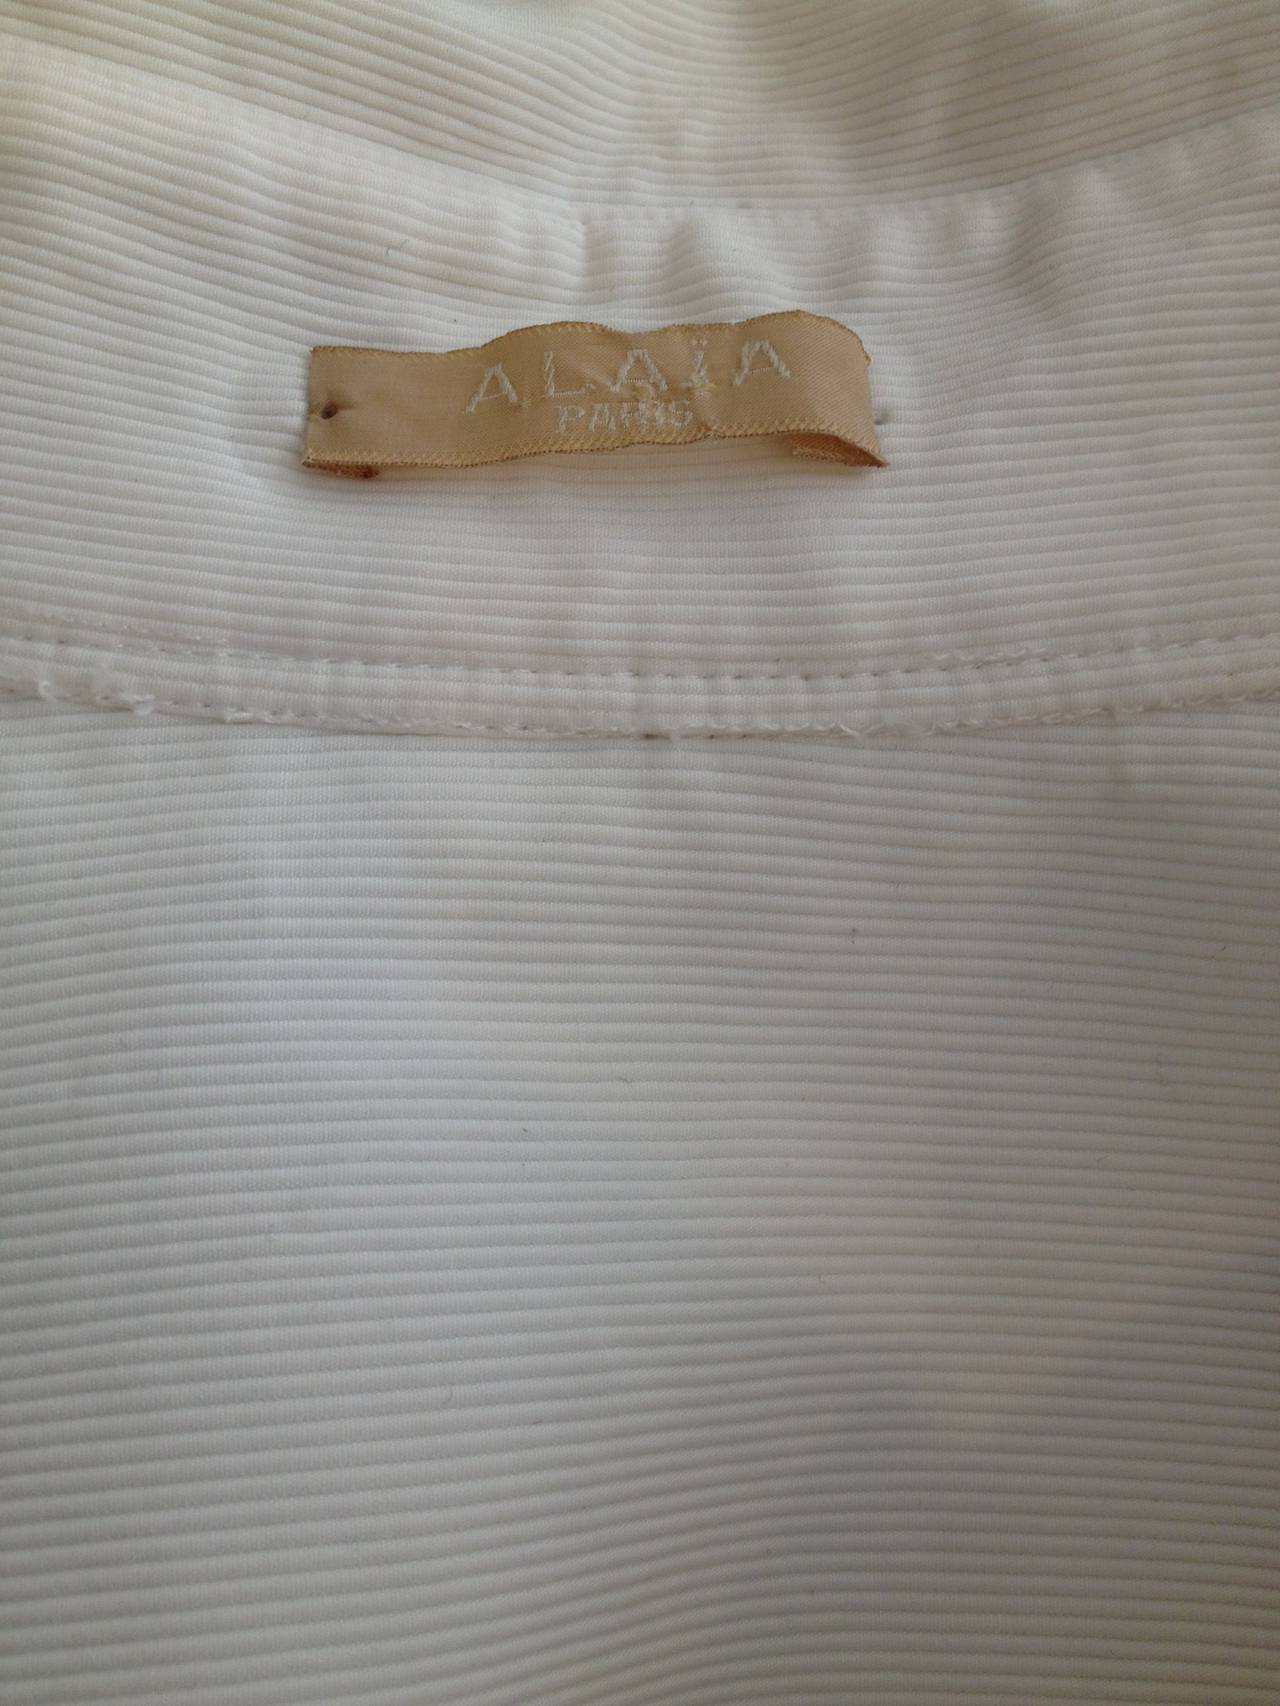 Alaia White Button Down Shirt Dress In Excellent Condition In San Francisco, CA